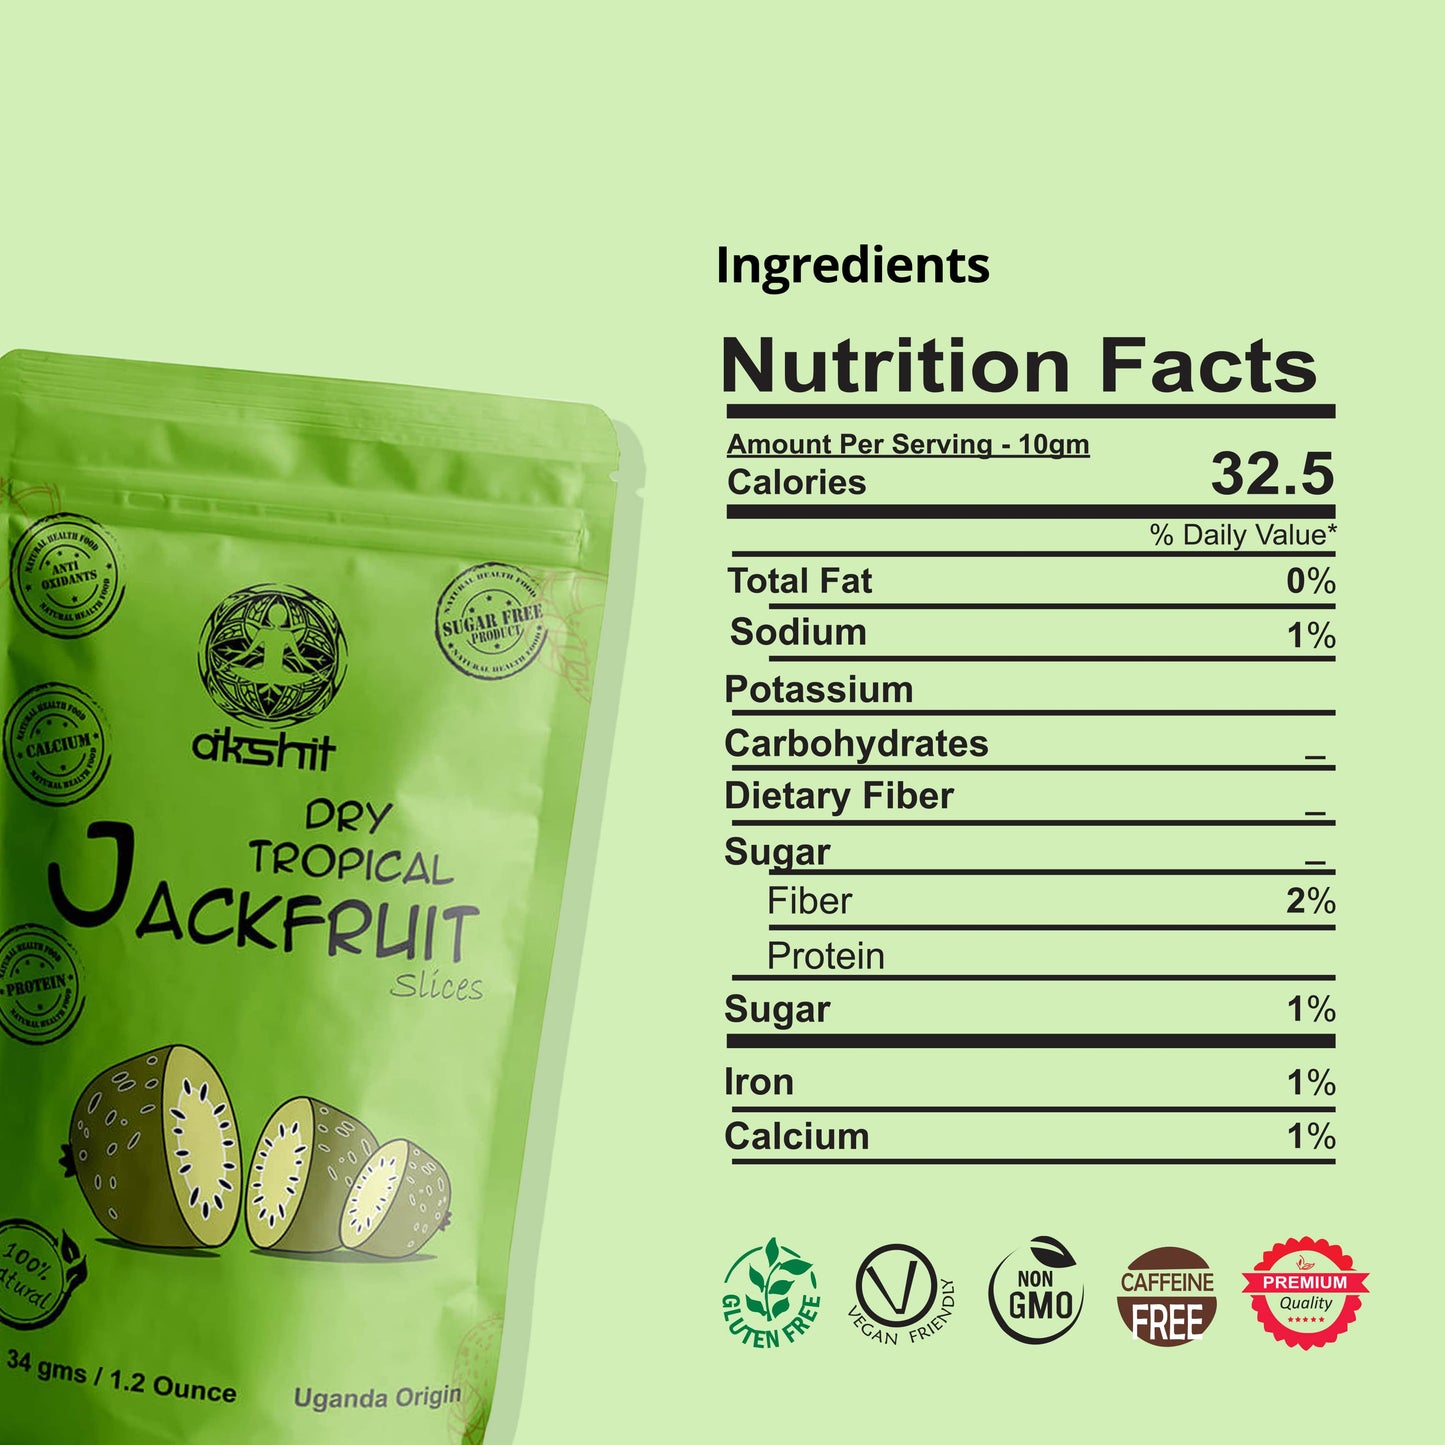 
                  
                    nutrition facts, calories32.5, total fat 0%, sodium 1%, potassium 0%, carbohydrates 0%, dietary fiber 0%, sugar 1%, fiber 2%, protein 0%, iron 1%, calcium 1%. Organic Dried Jackfruit snack| Dry Jackfruit Chips| No Sugar Added| Gluten Free NON-GMO | 4.8 Oz (4 count)
                  
                